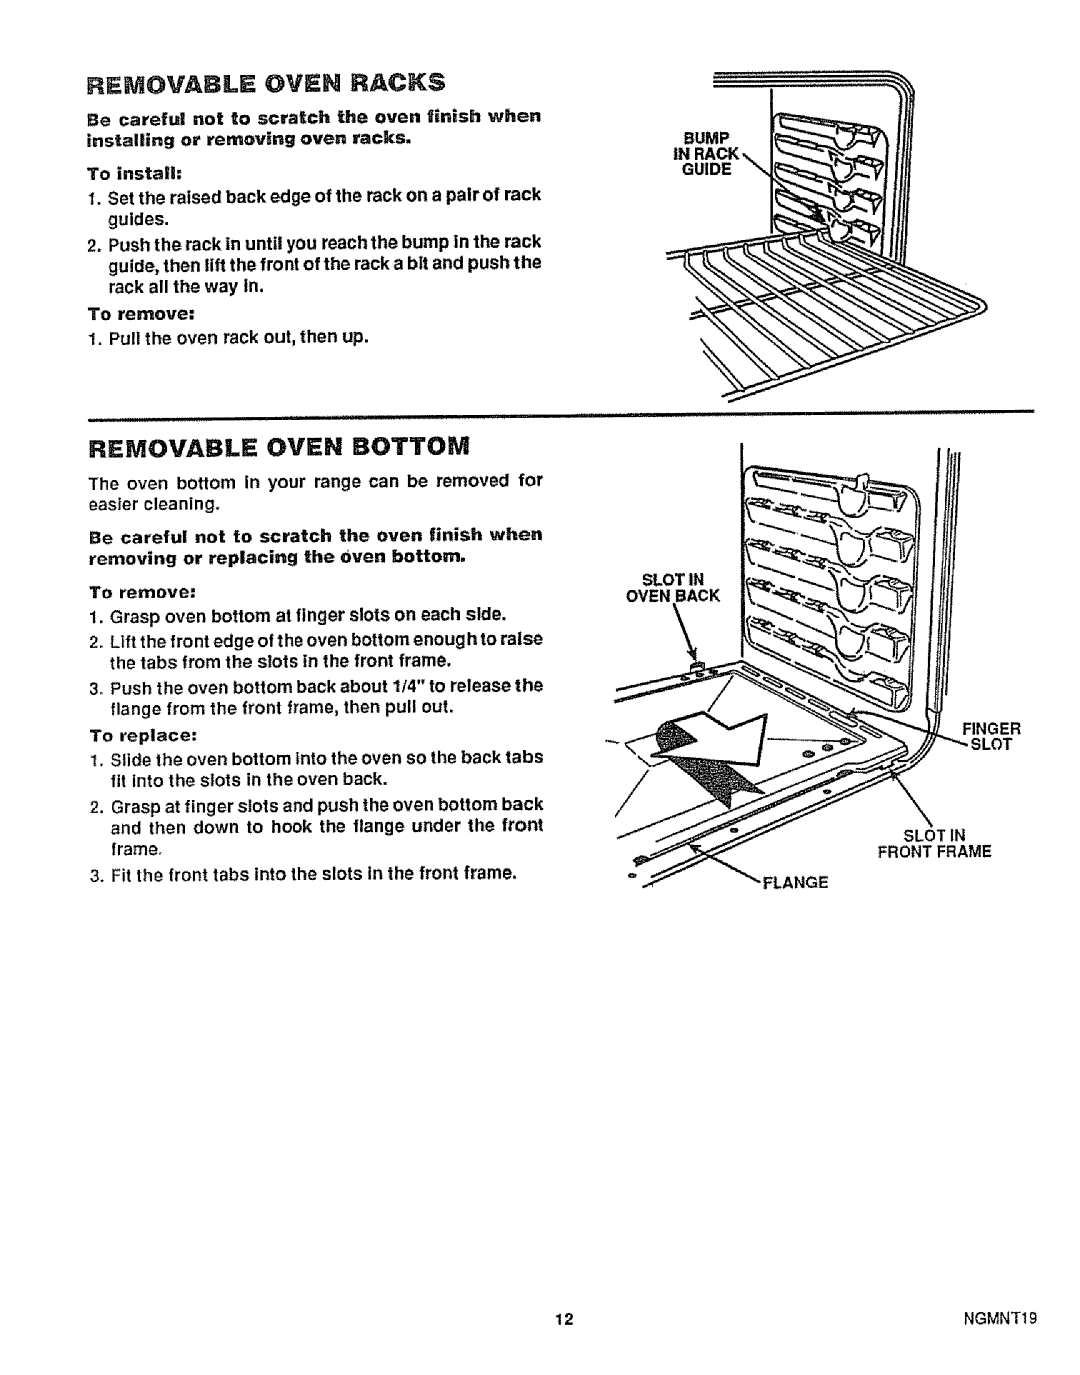 Sears 911.363209 warranty Removable Oven Racks, Removable Oven Bottom 